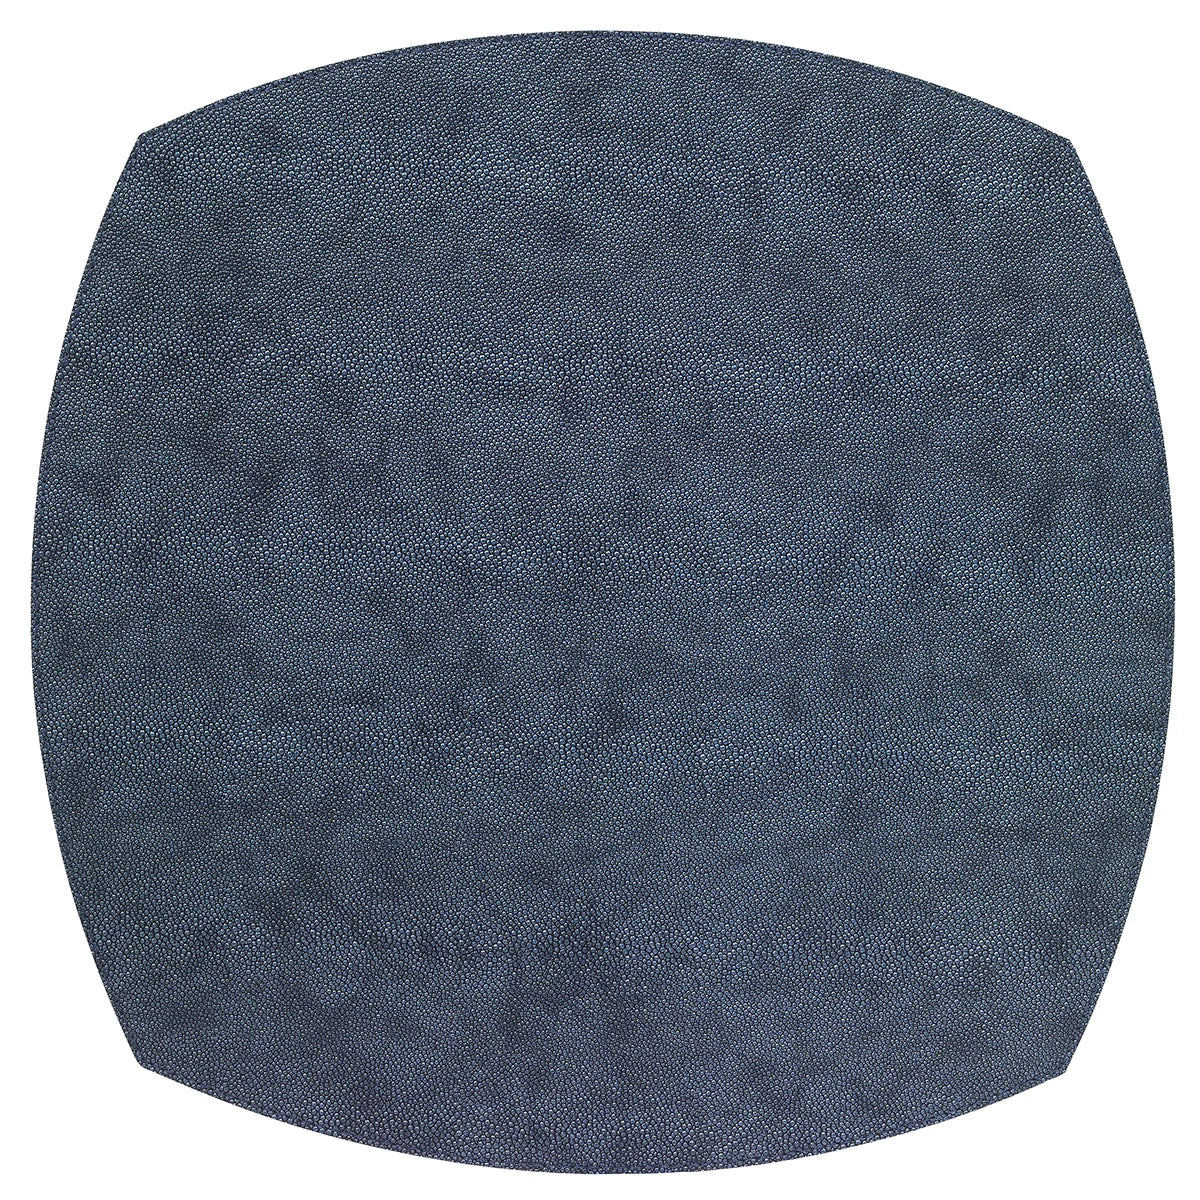 STINGRAY EILLIPTICAL SQUARE PLACEMAT IN NAVY